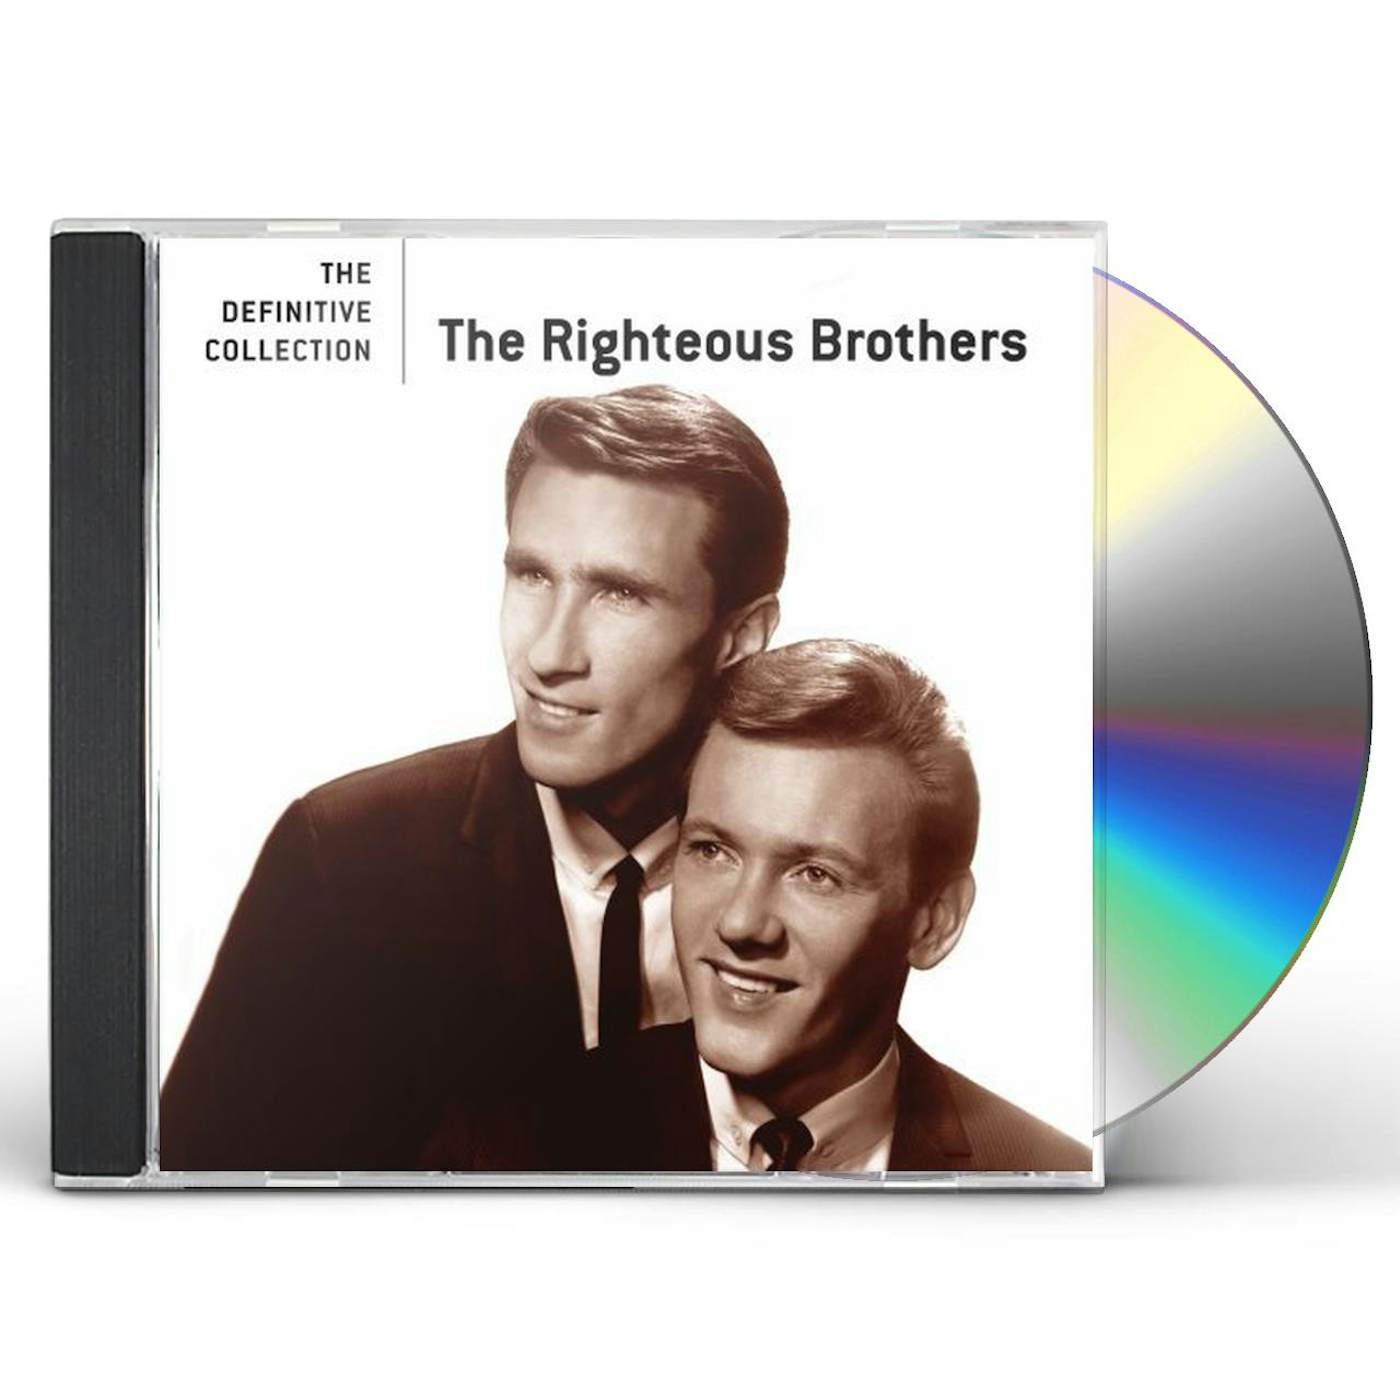 The Righteous Brothers DEFINITIVE COLLECTION CD